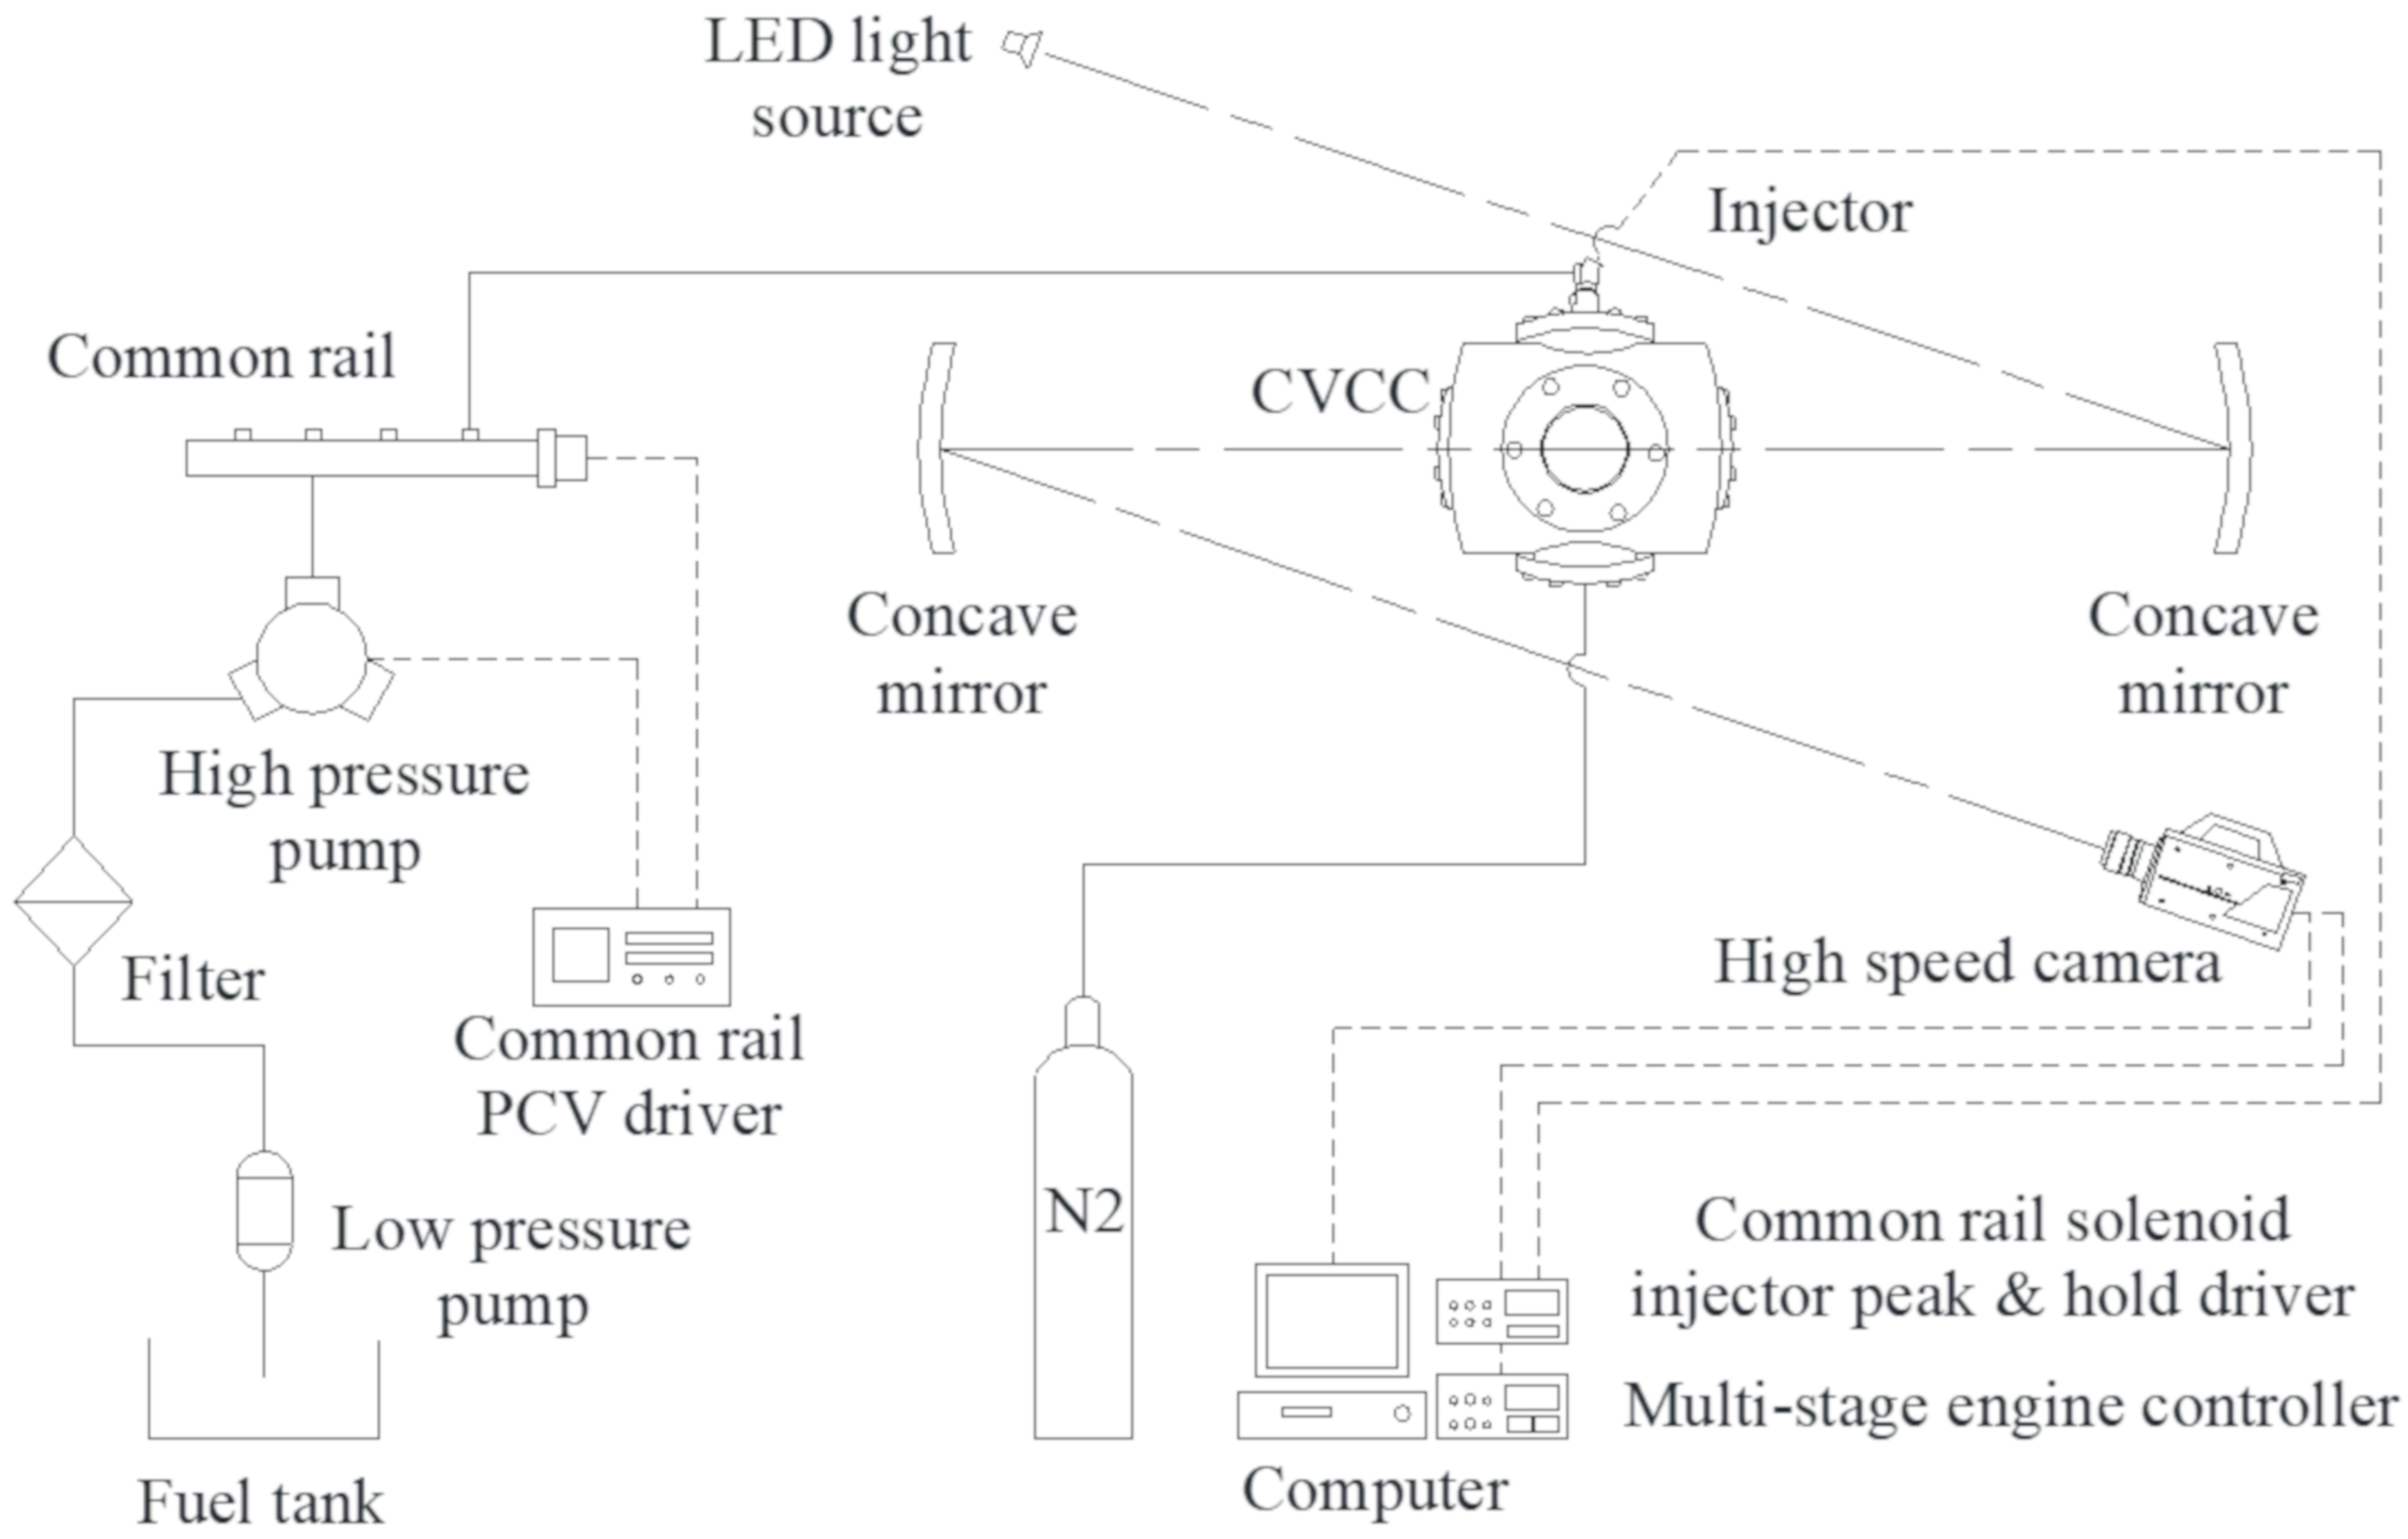 Schematics of a common rail diesel injector showing the notation used